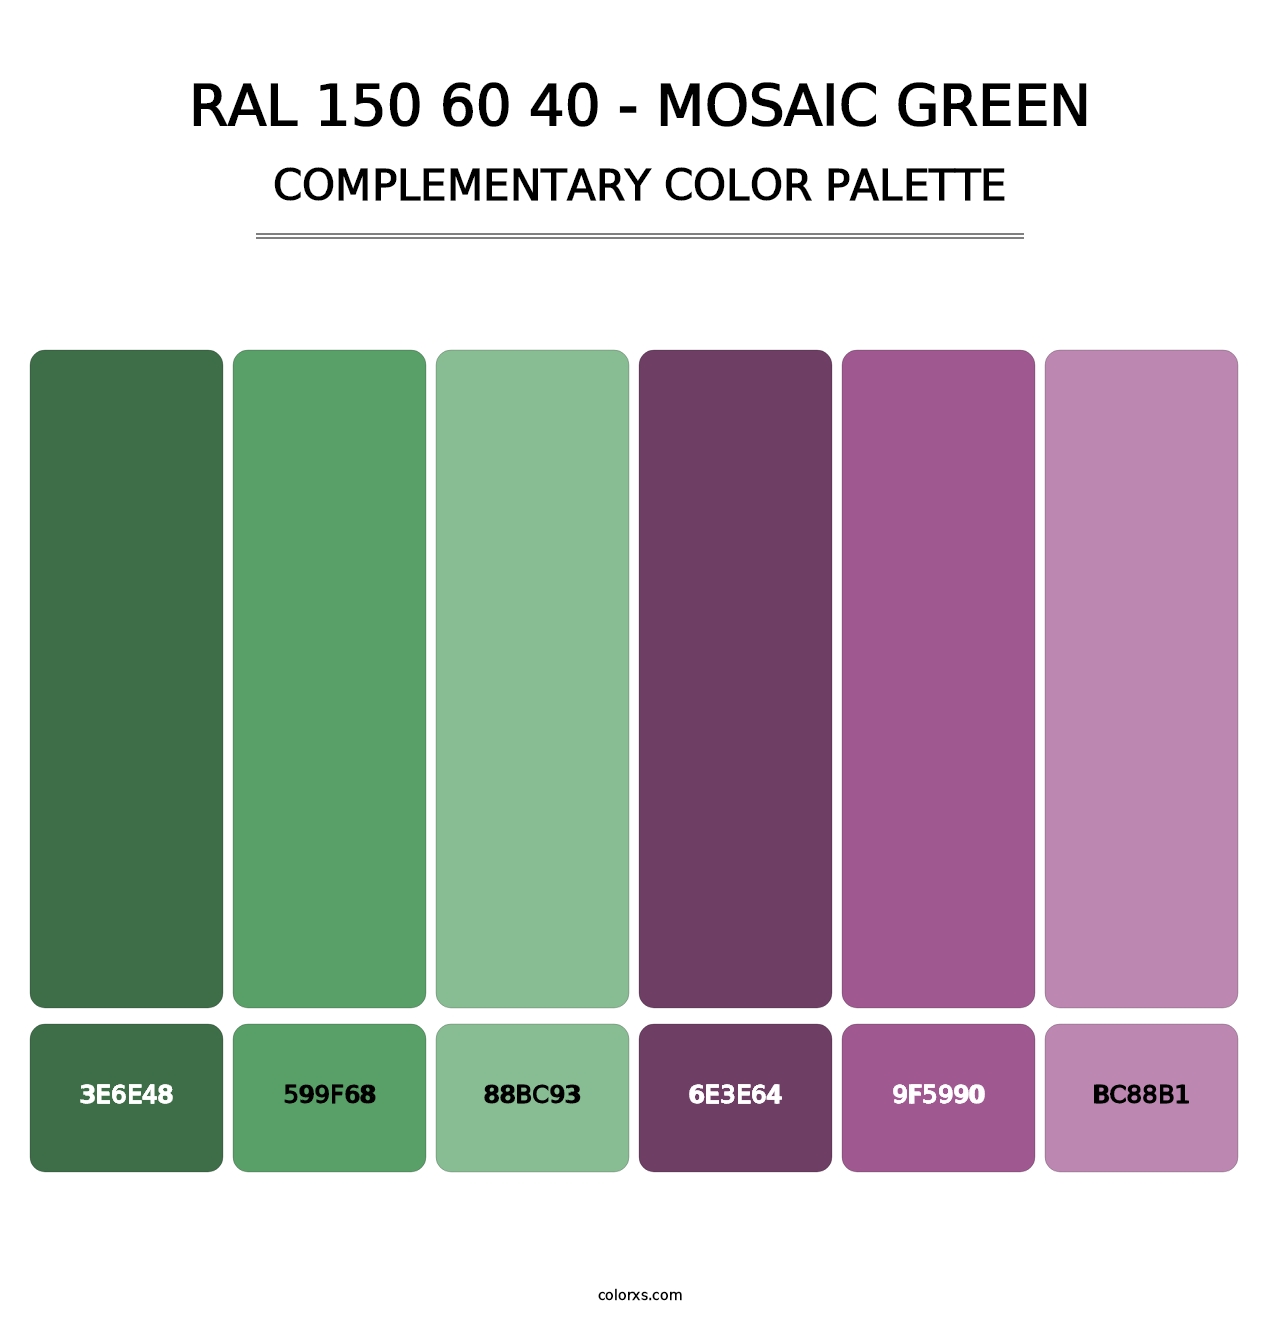 RAL 150 60 40 - Mosaic Green - Complementary Color Palette